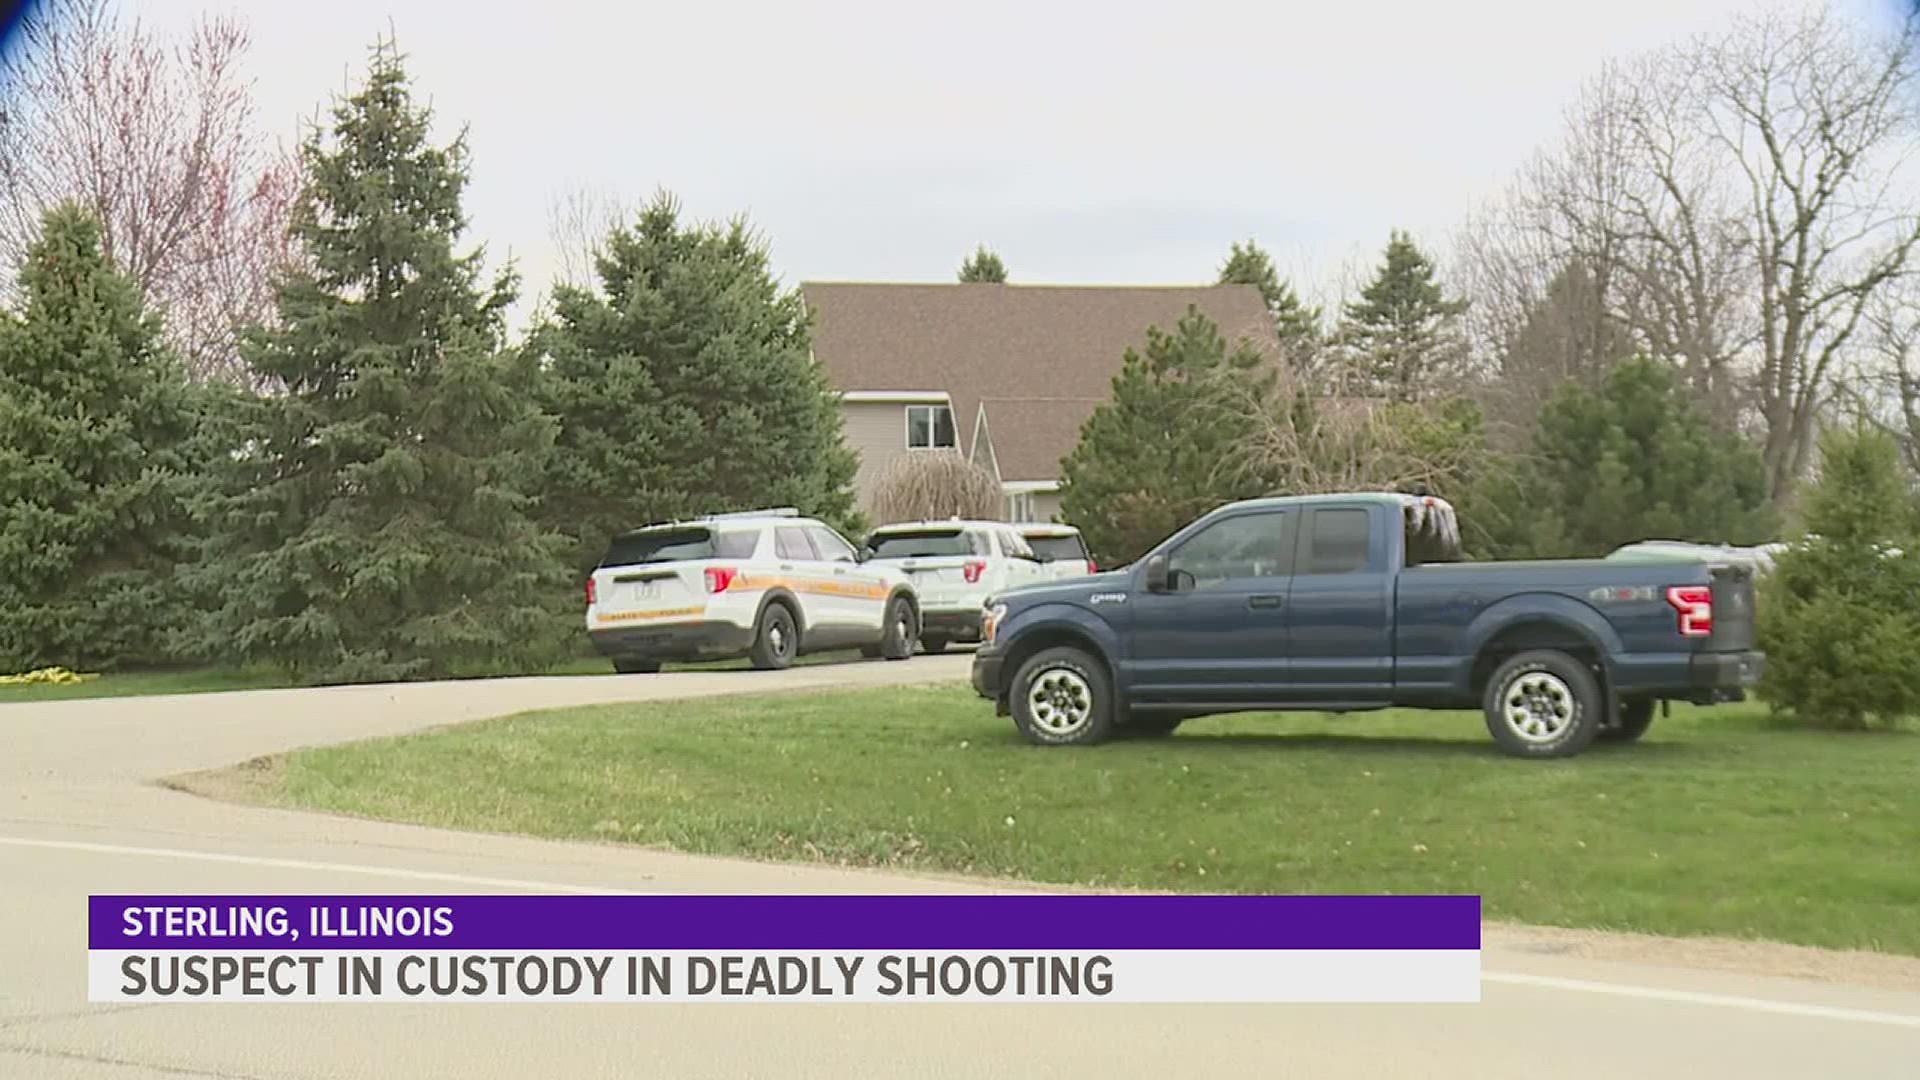 Whiteside County officials revealed that an 84-year-old man is dead and a 16-year-old family member is in custody after the Monday morning shooting.